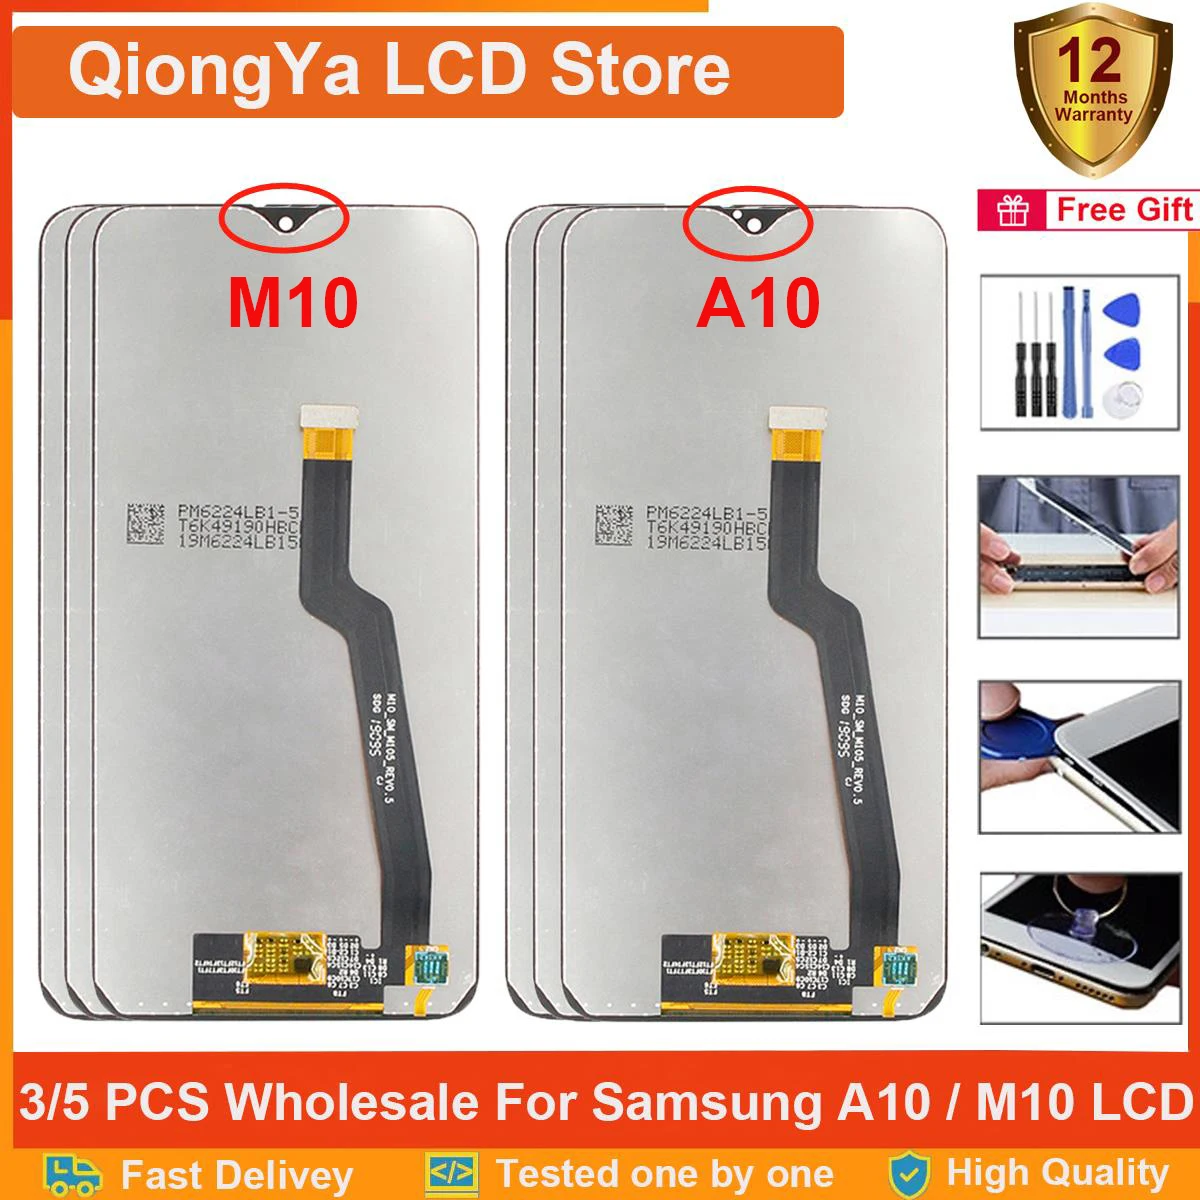 3/5PCS Wholesale a10 LCD For Samsung Galaxy A10 lcd A105F A105FD M10 M105 M405F M105F/DS Display Touch Screen Digitizer Assembly